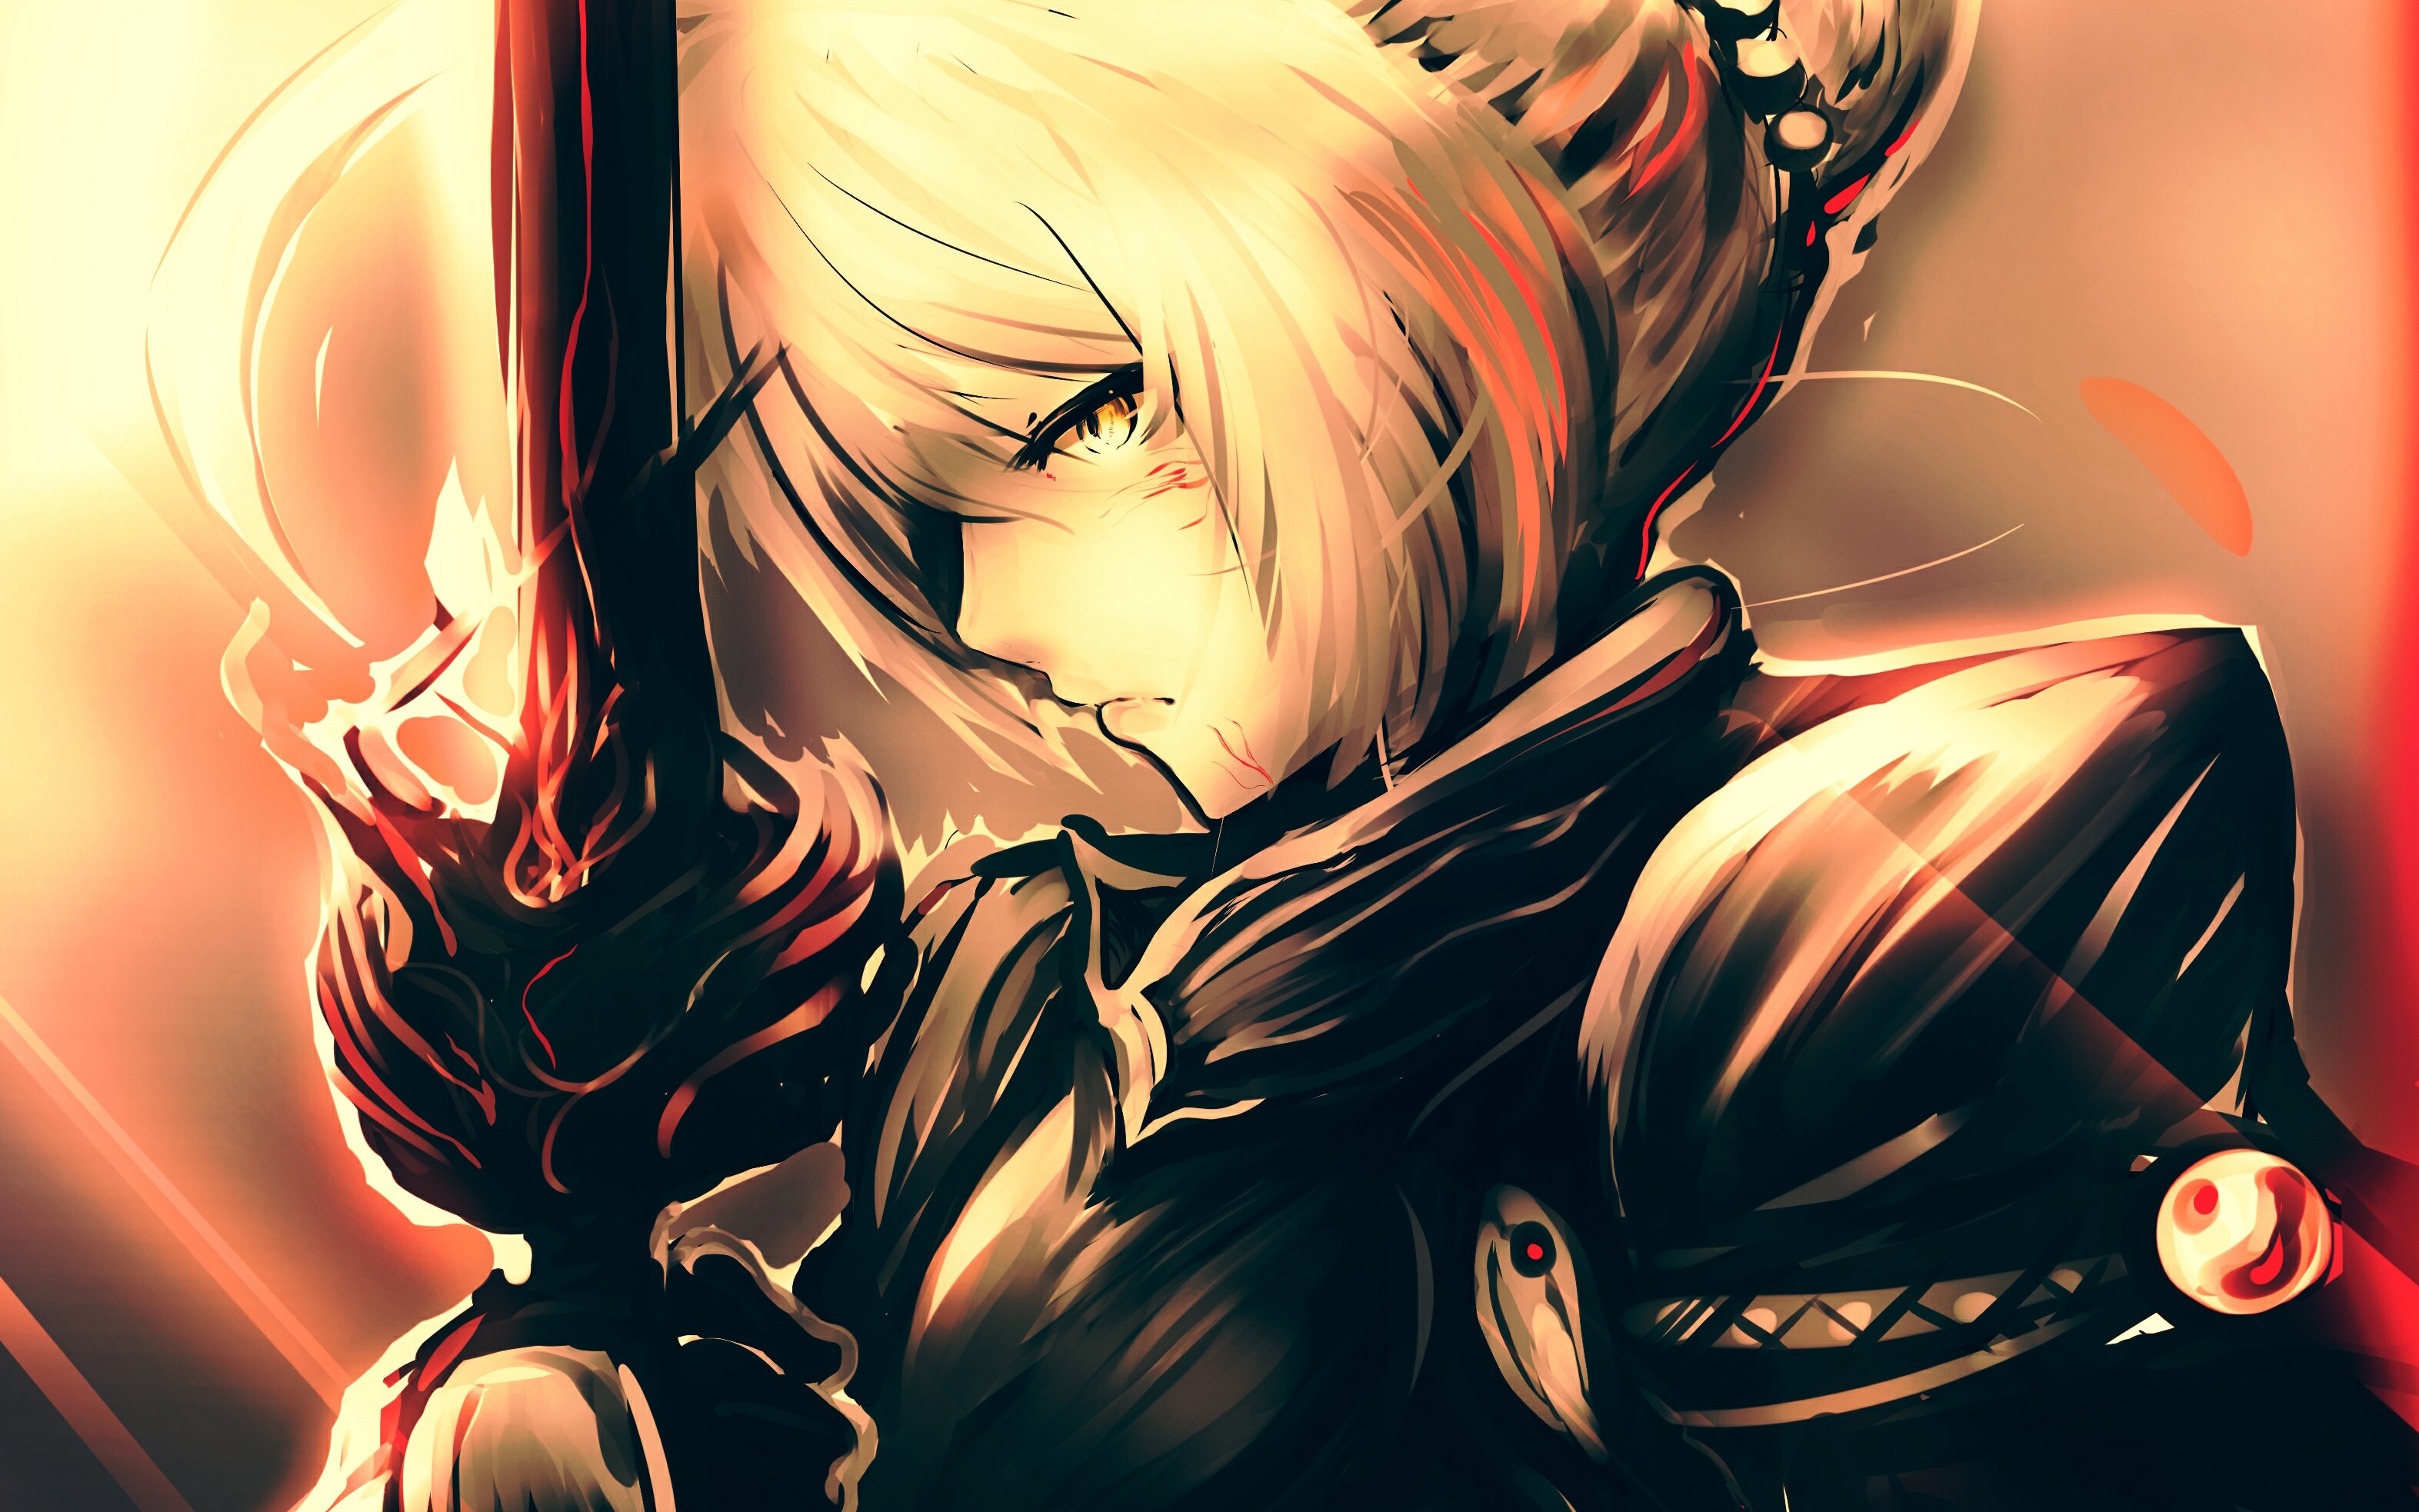 fate-stay-night-saber-profile-view-sword-blonde-fate-series-anime-11345.jpg